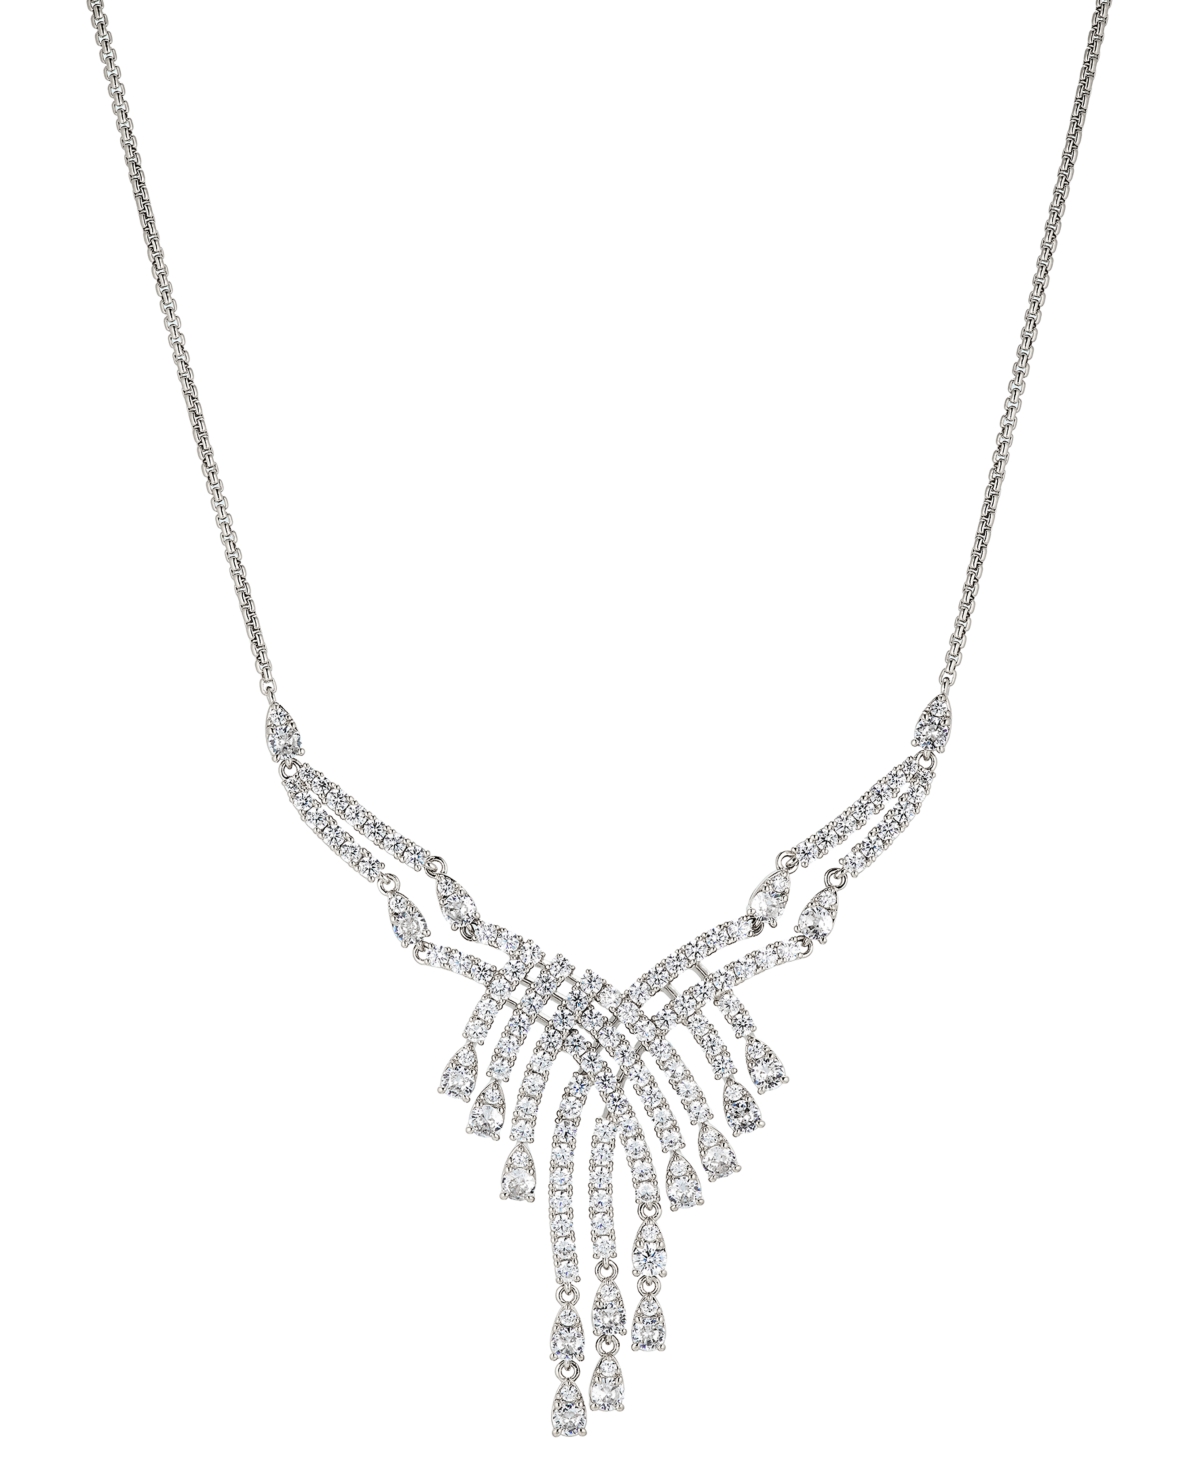 Silver-Tone Cubic Zirconia Bib Necklace, 16" + 2" extender, Created For Macy's - Silver